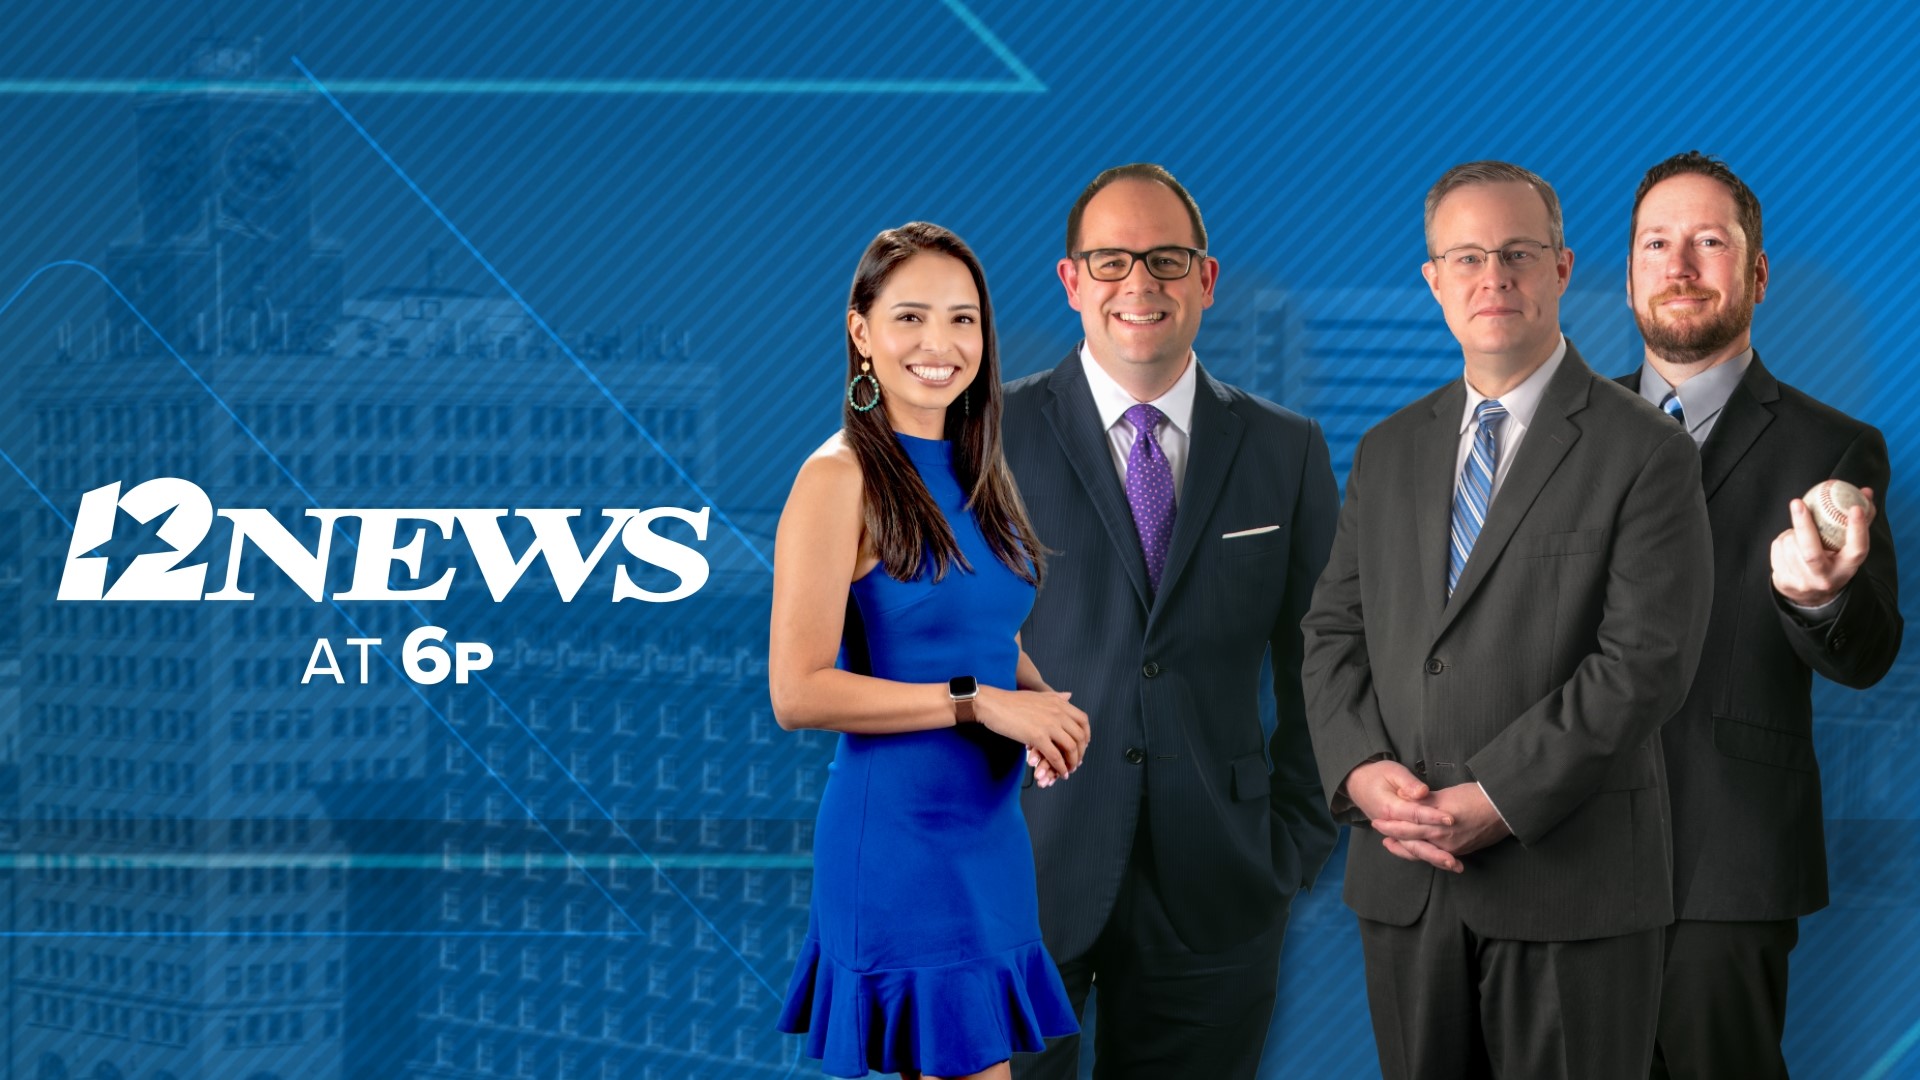 12News at 6pm - Breaking news, weather and sports Southeast Texas' top news team, Jordan Williams, Patrick Vaughn and Ashly Elam. 